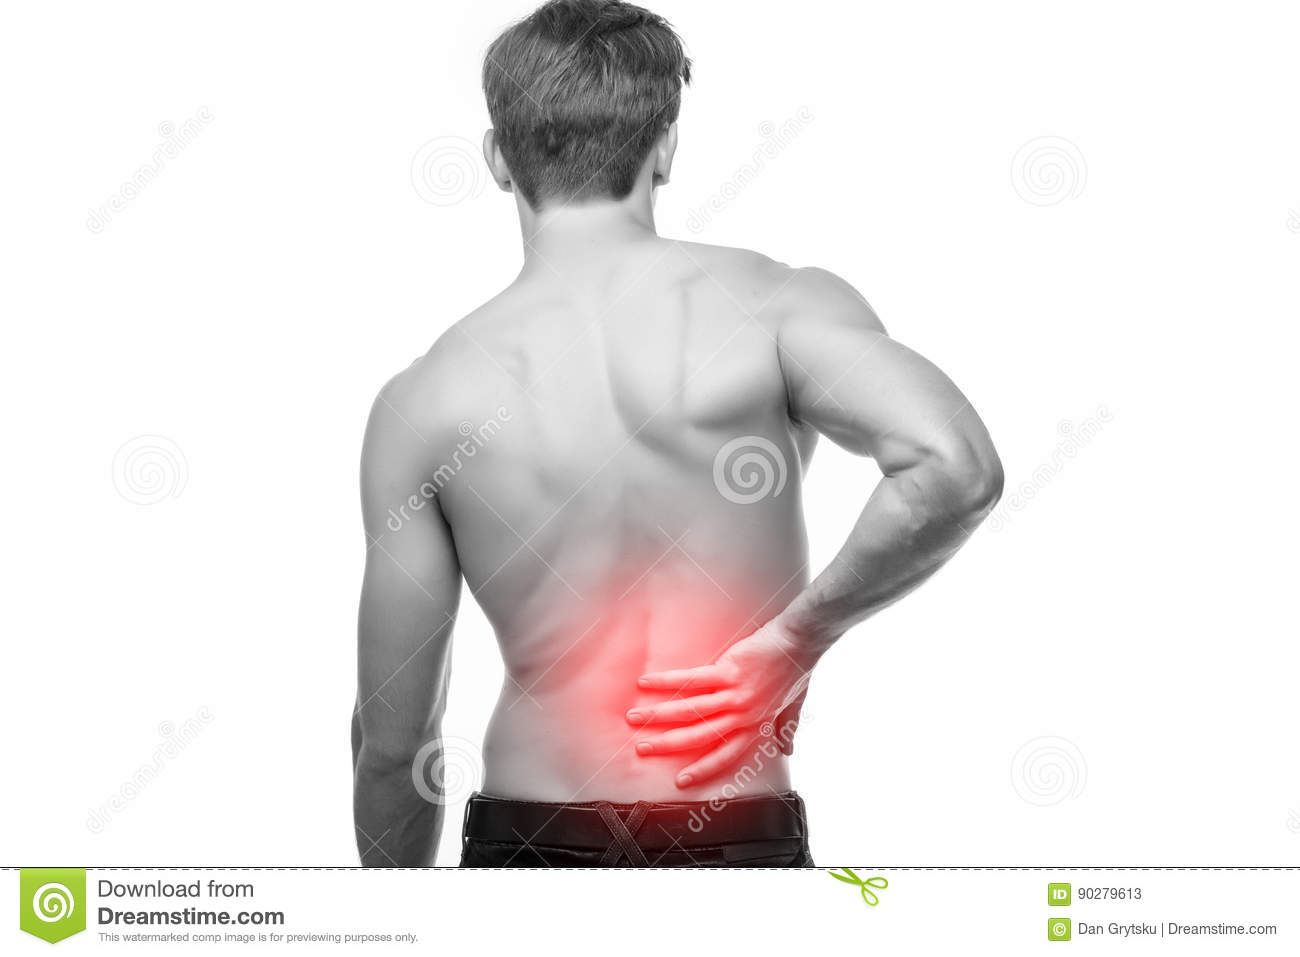 close-up-young-man-body-rubbing-his-painful-back-pain-relief-chiropractic-concept-90279613.jpg